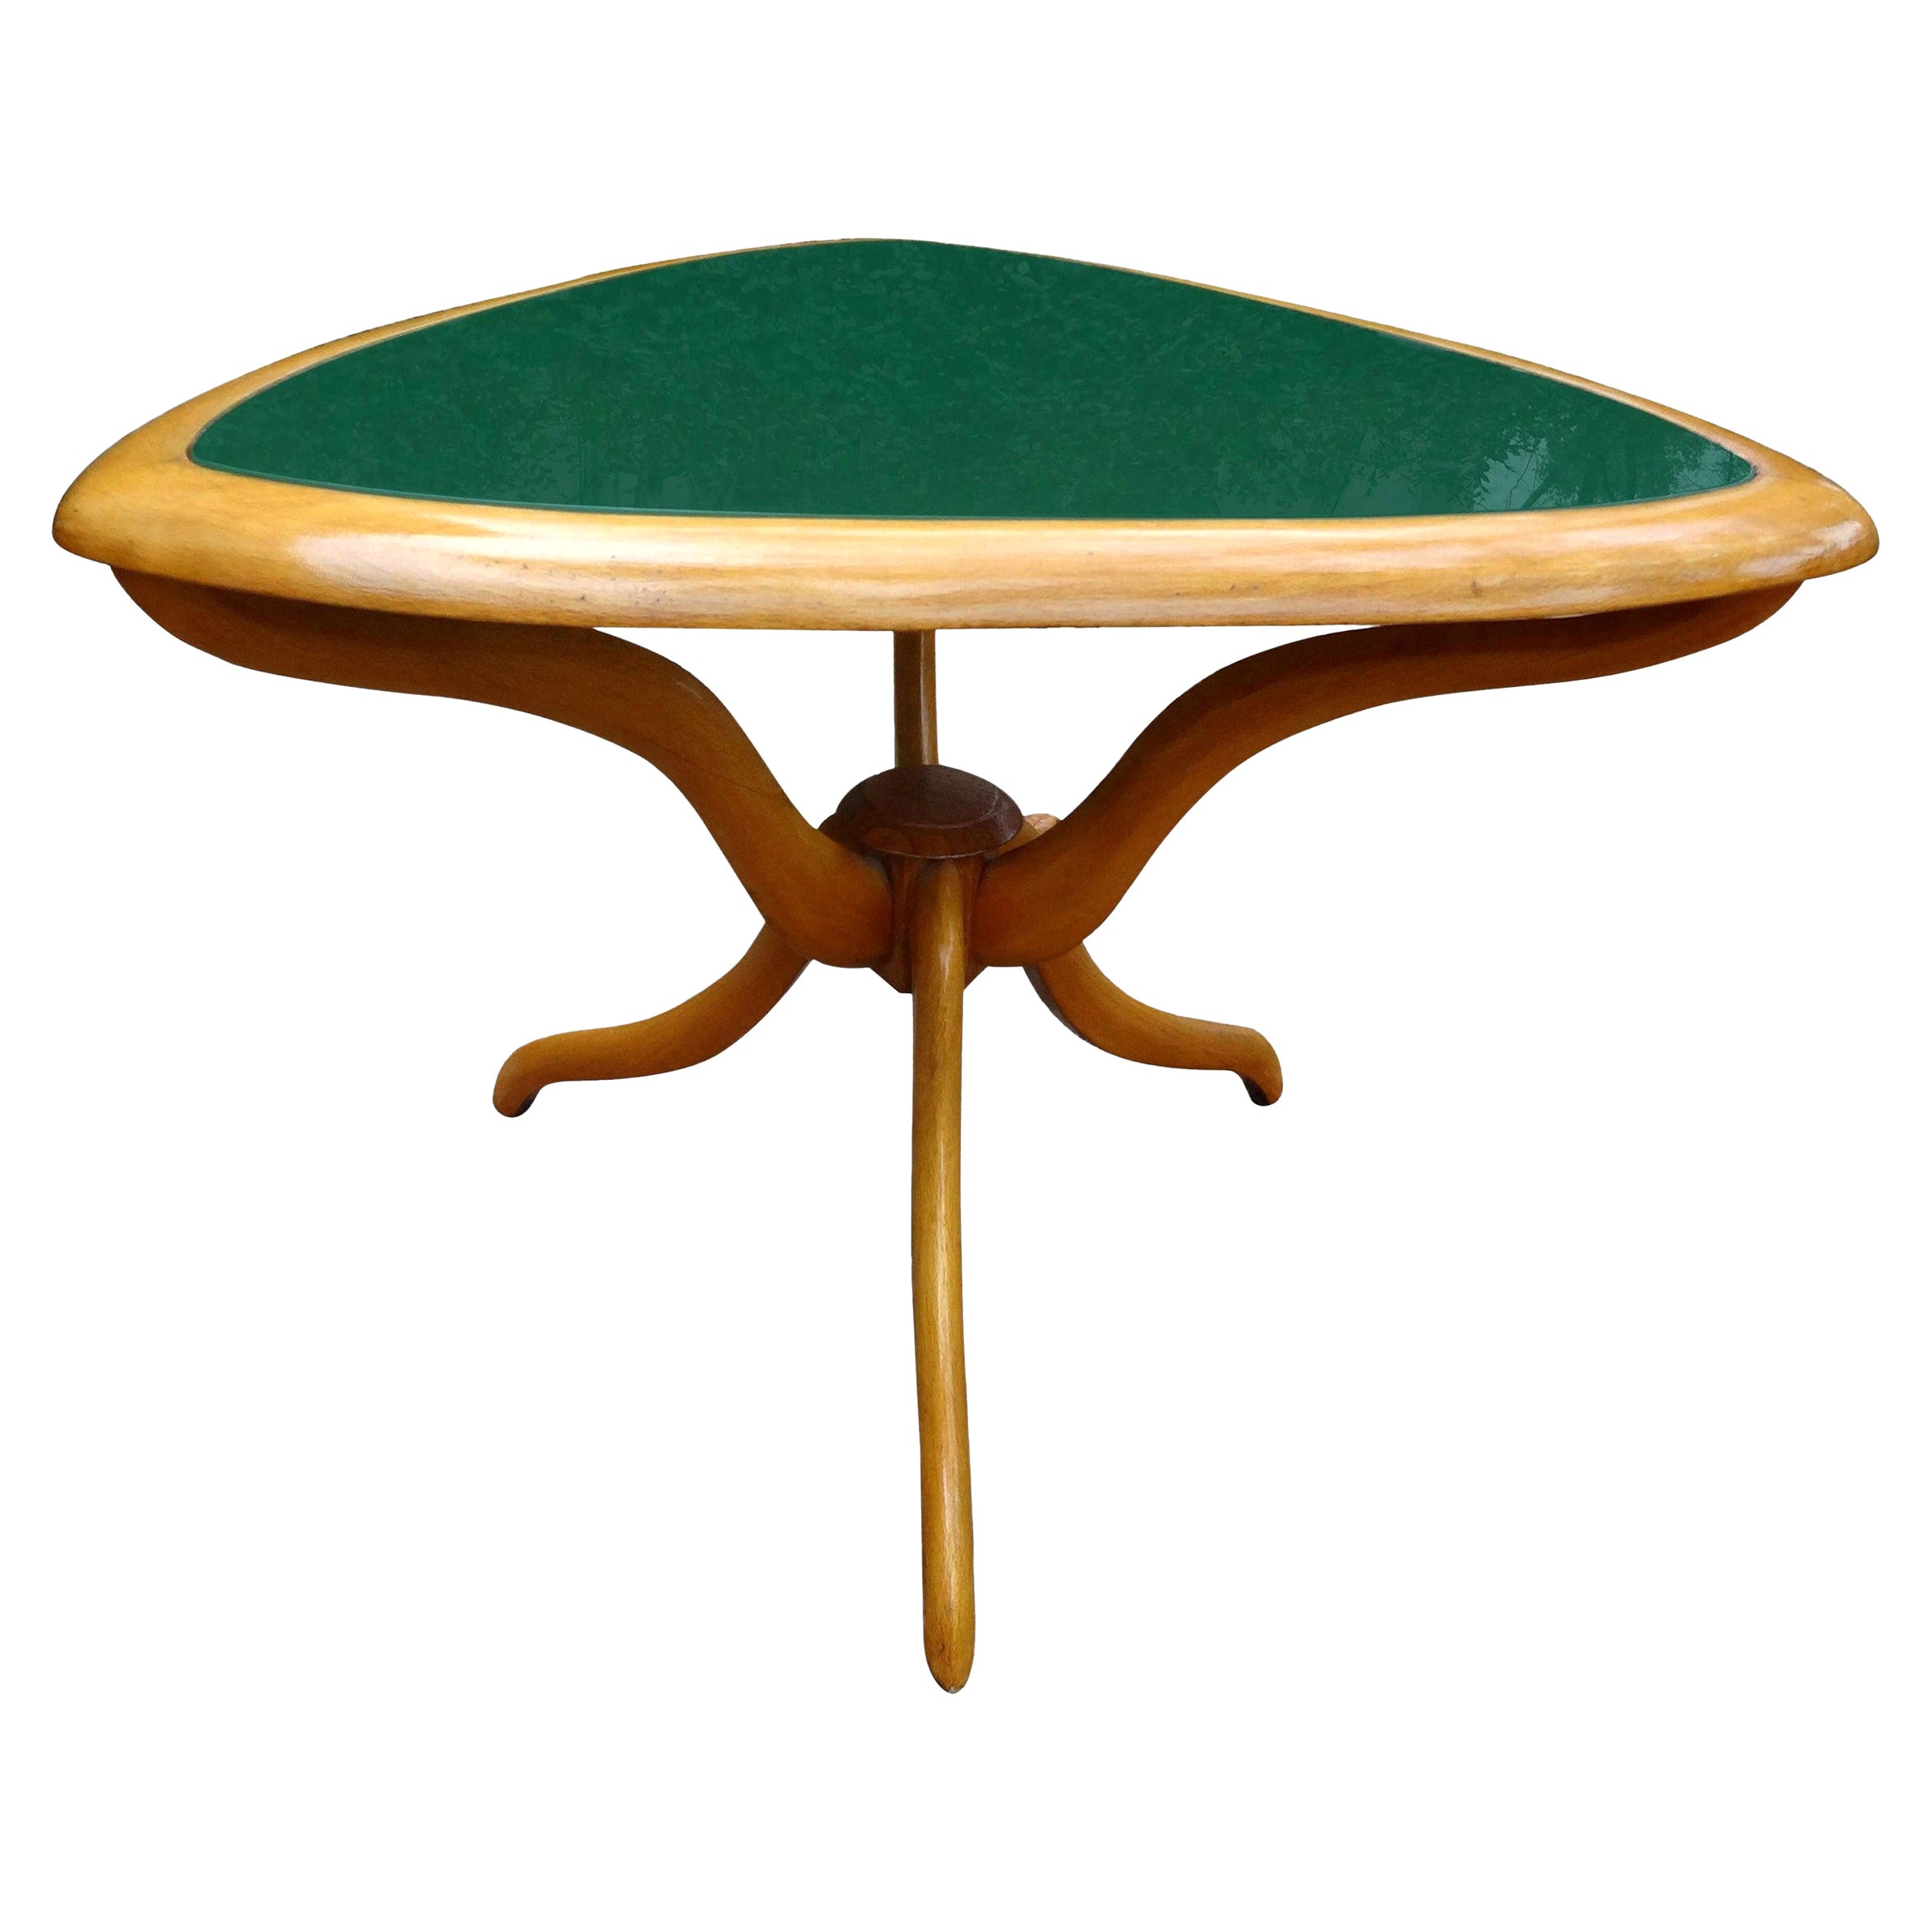 Table italienne moderne d'inspiration Gio Ponti